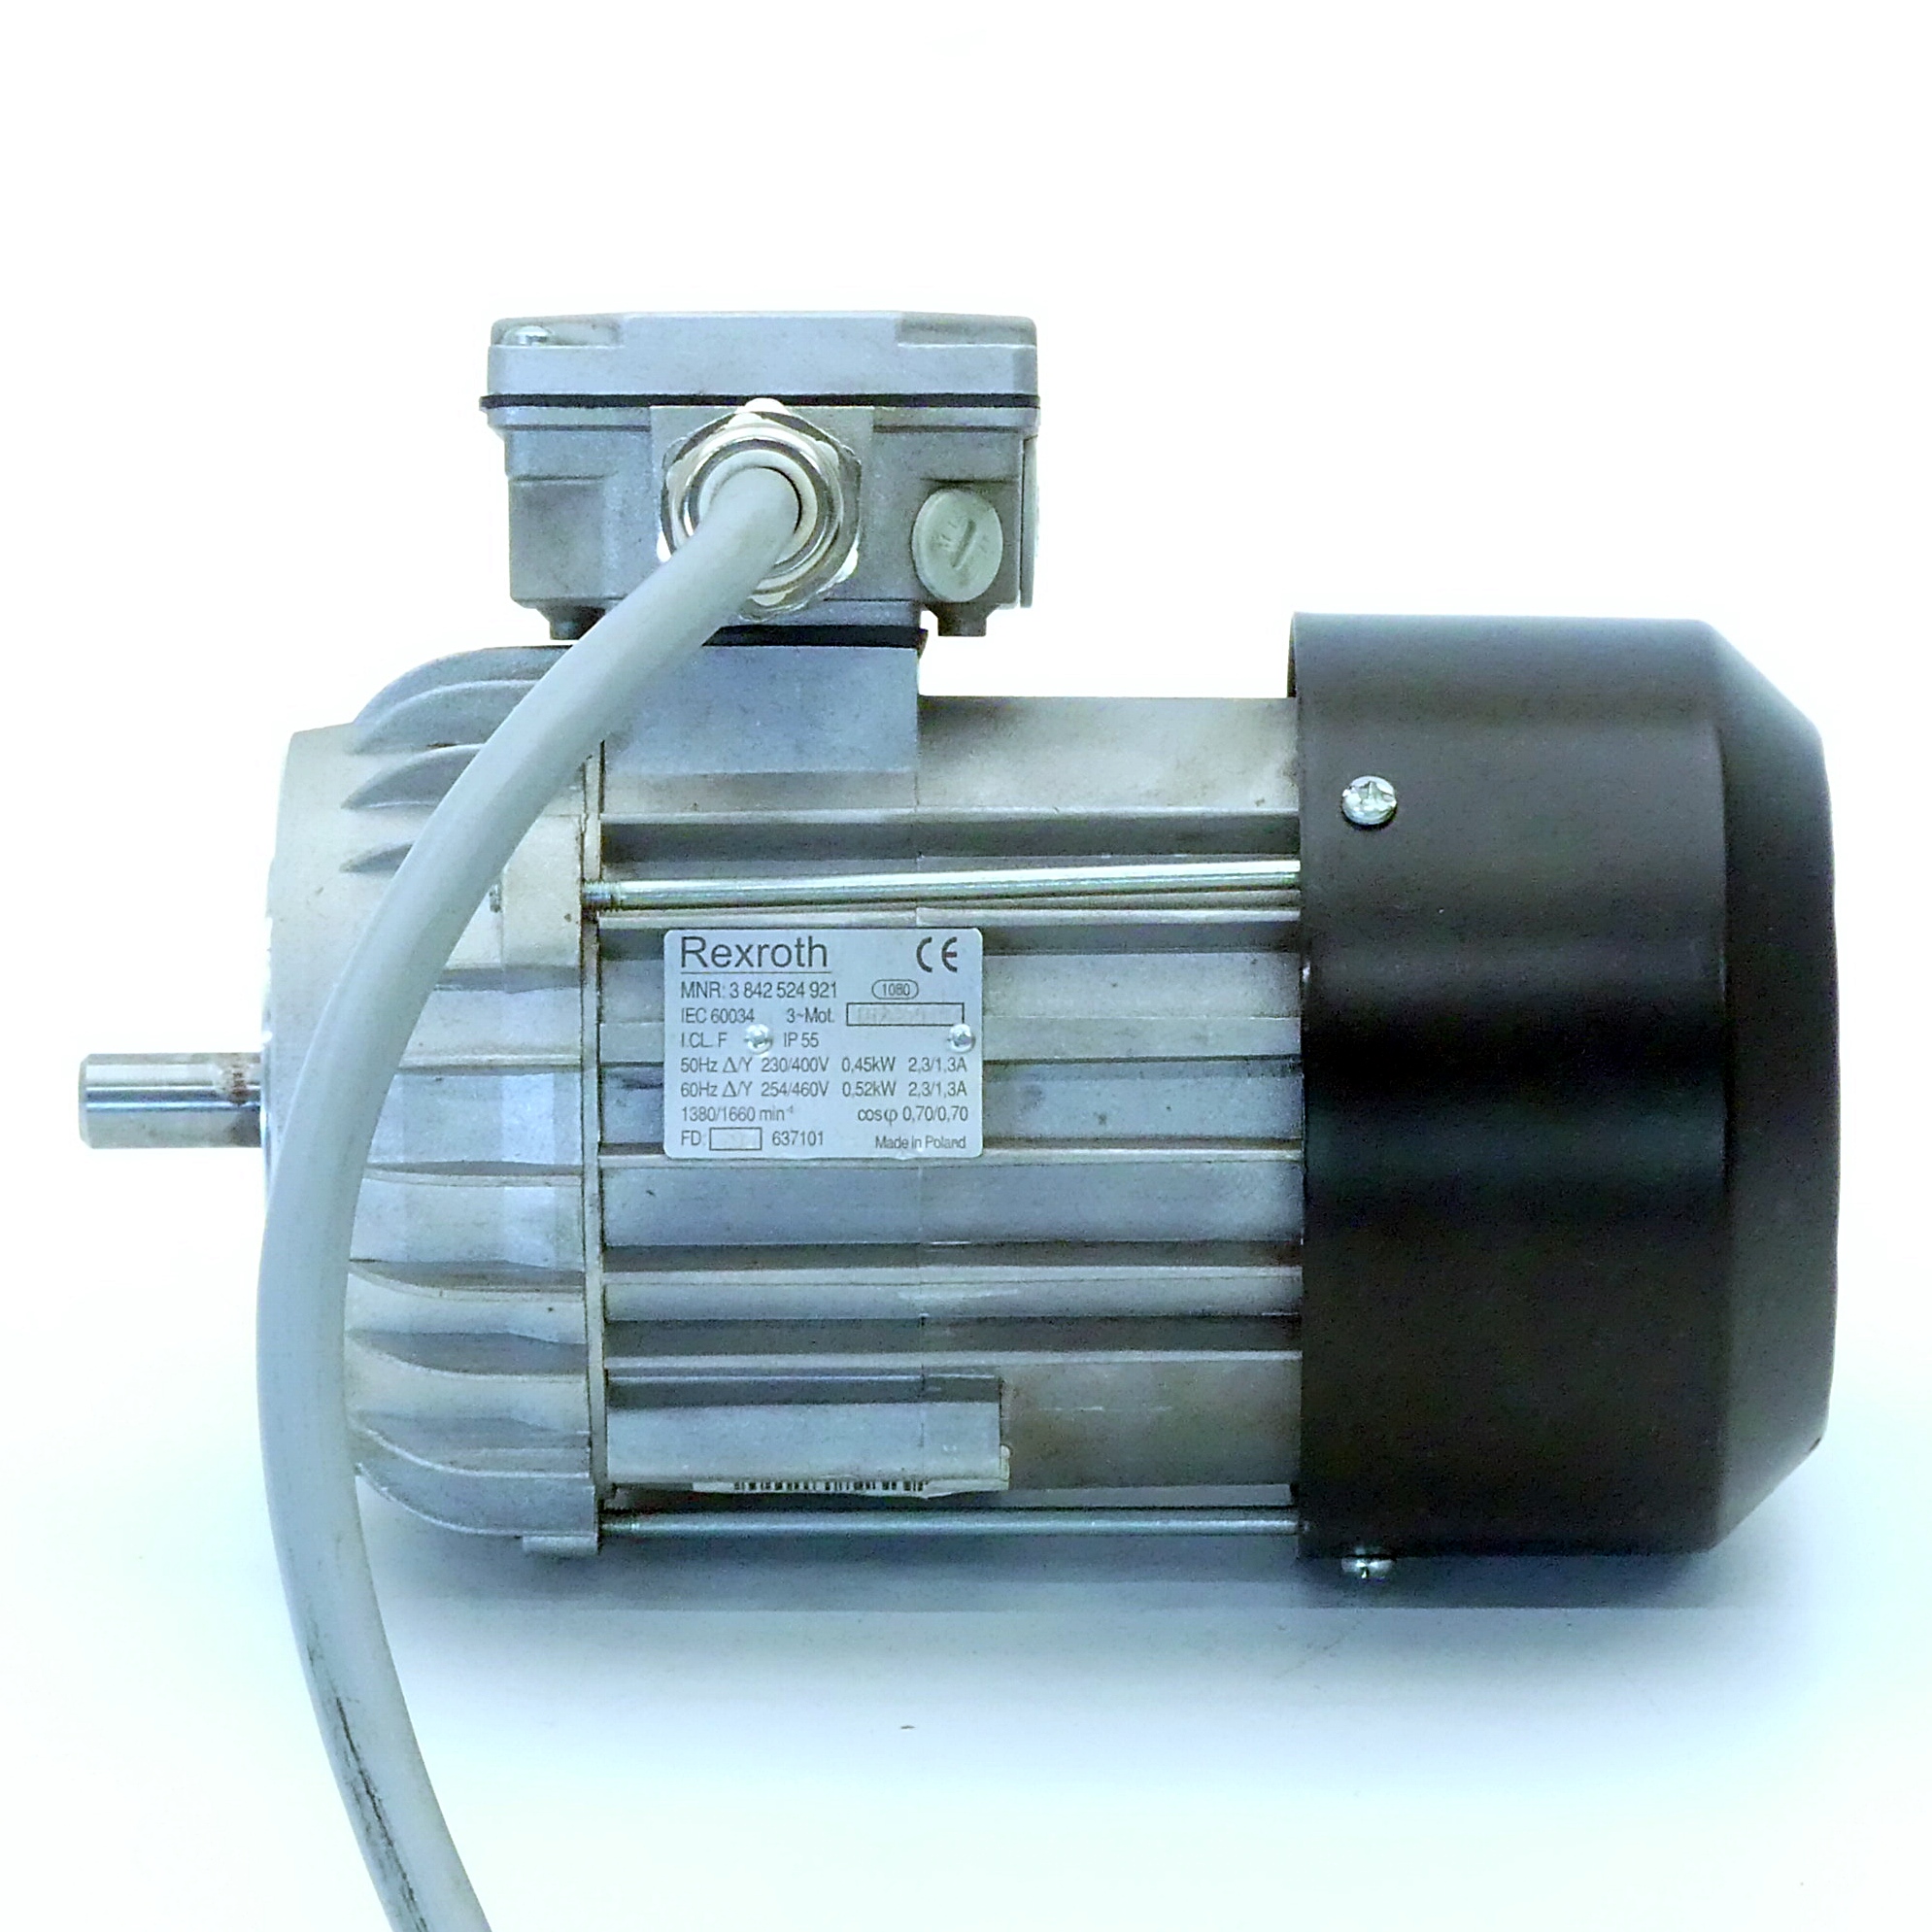 three-phase motor with cable 3 842 524 921 